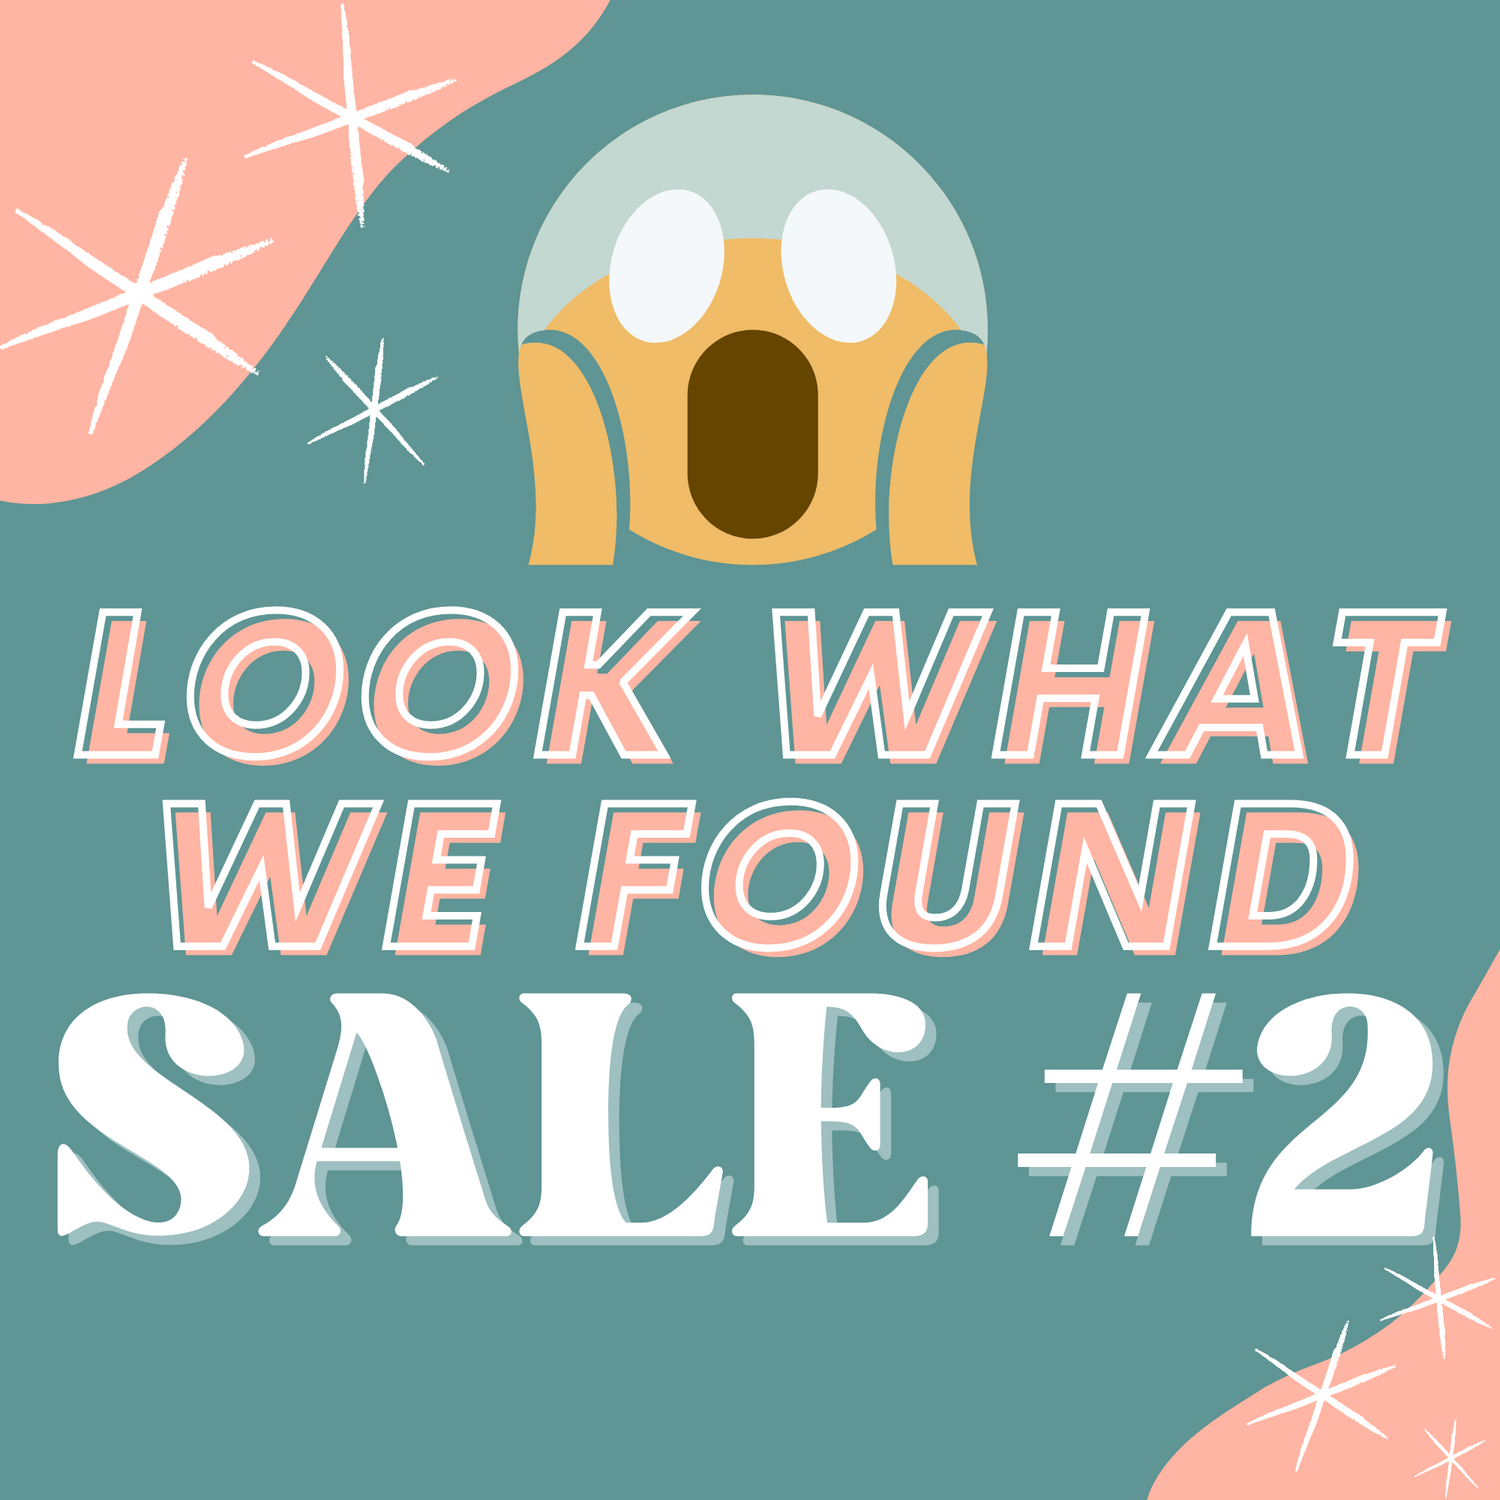 Look What We Found Sale! #2 - 01/14/23